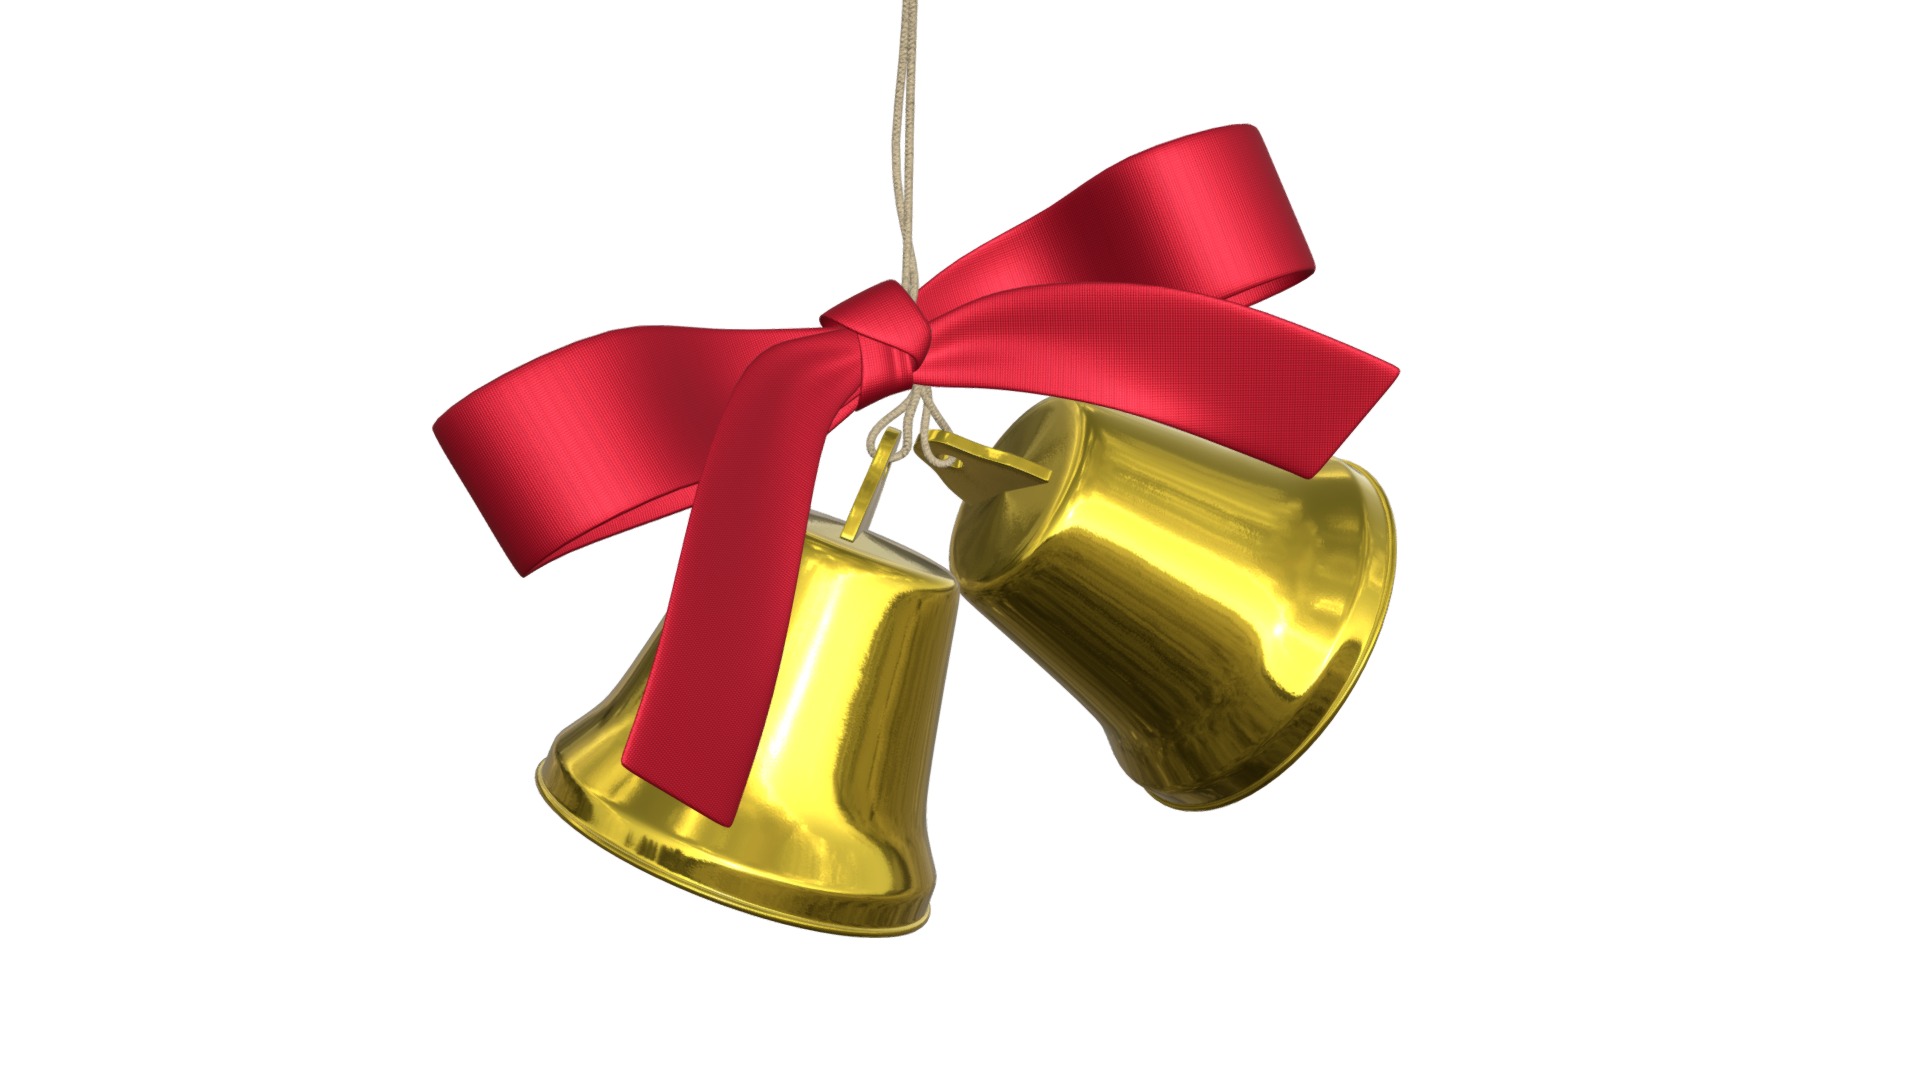 3D model Bells with bow - This is a 3D model of the Bells with bow. The 3D model is about a red and yellow bell pepper.